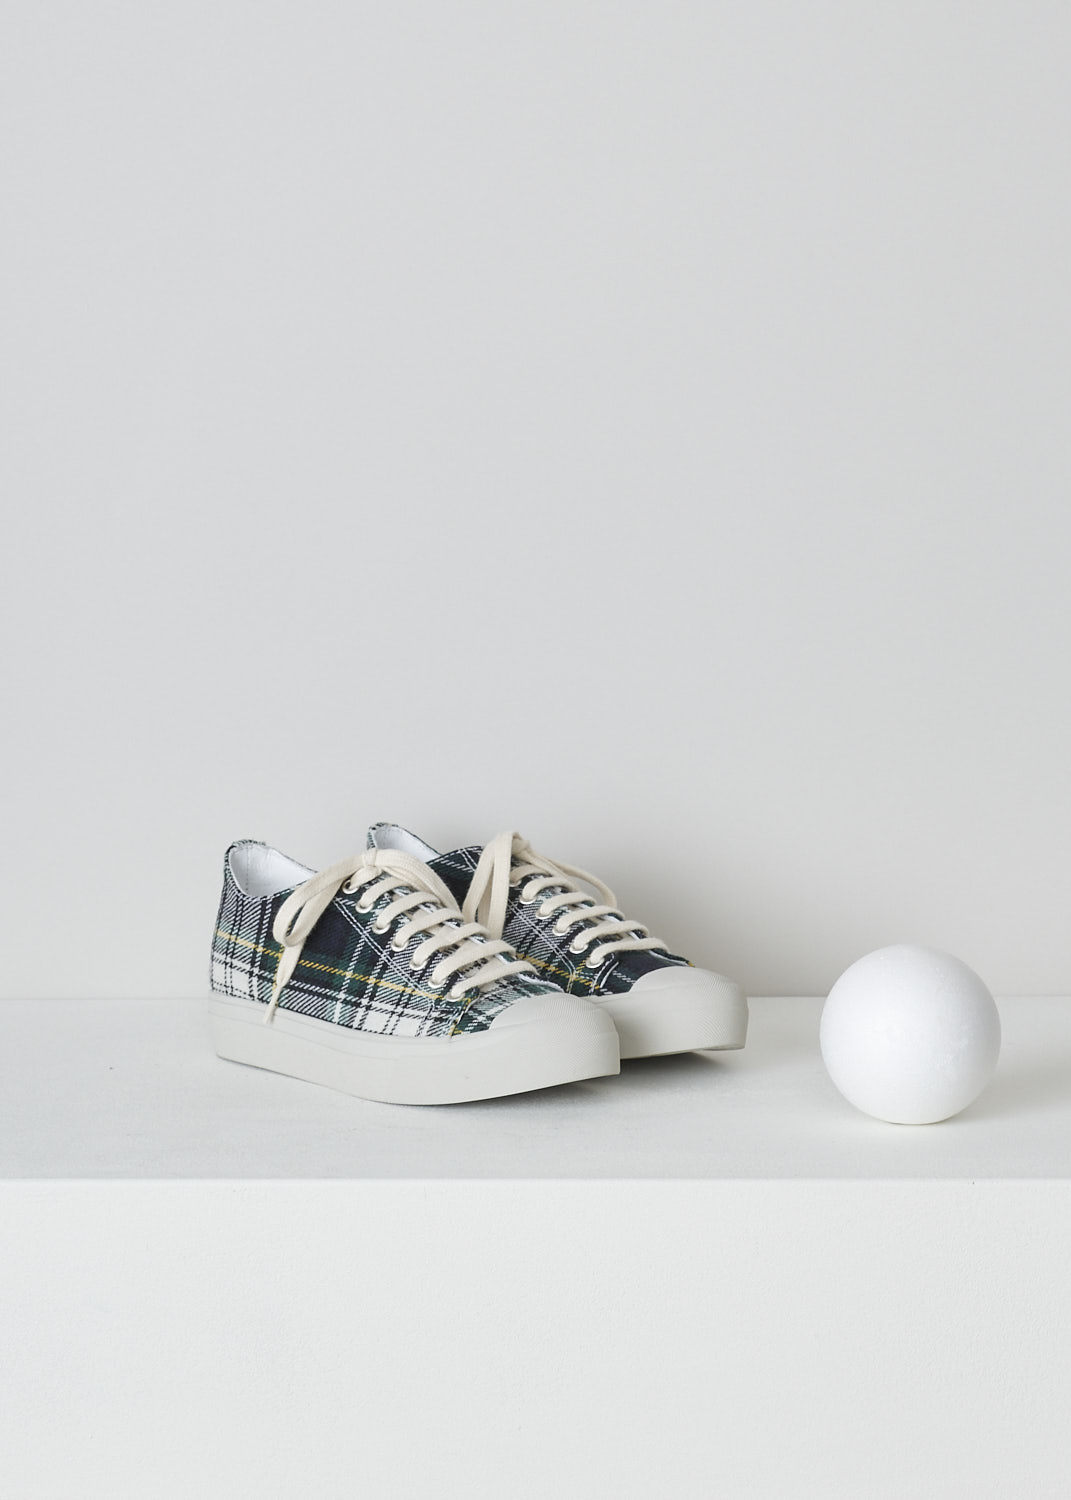 SOFIE Dâ€™HOORE, BLUE AND YELLOW TARTAN LOW TOP SNEAKERS, FOLK_WSCOT_TARTAN_3, Grey, Yellow, Print, Front, These low top sneakers with blue and yellow tartan print feature front lace-up fastening with white laces. These sneakers have a round toe with a white rubber toe cap. These shoes have white rubber soles.
